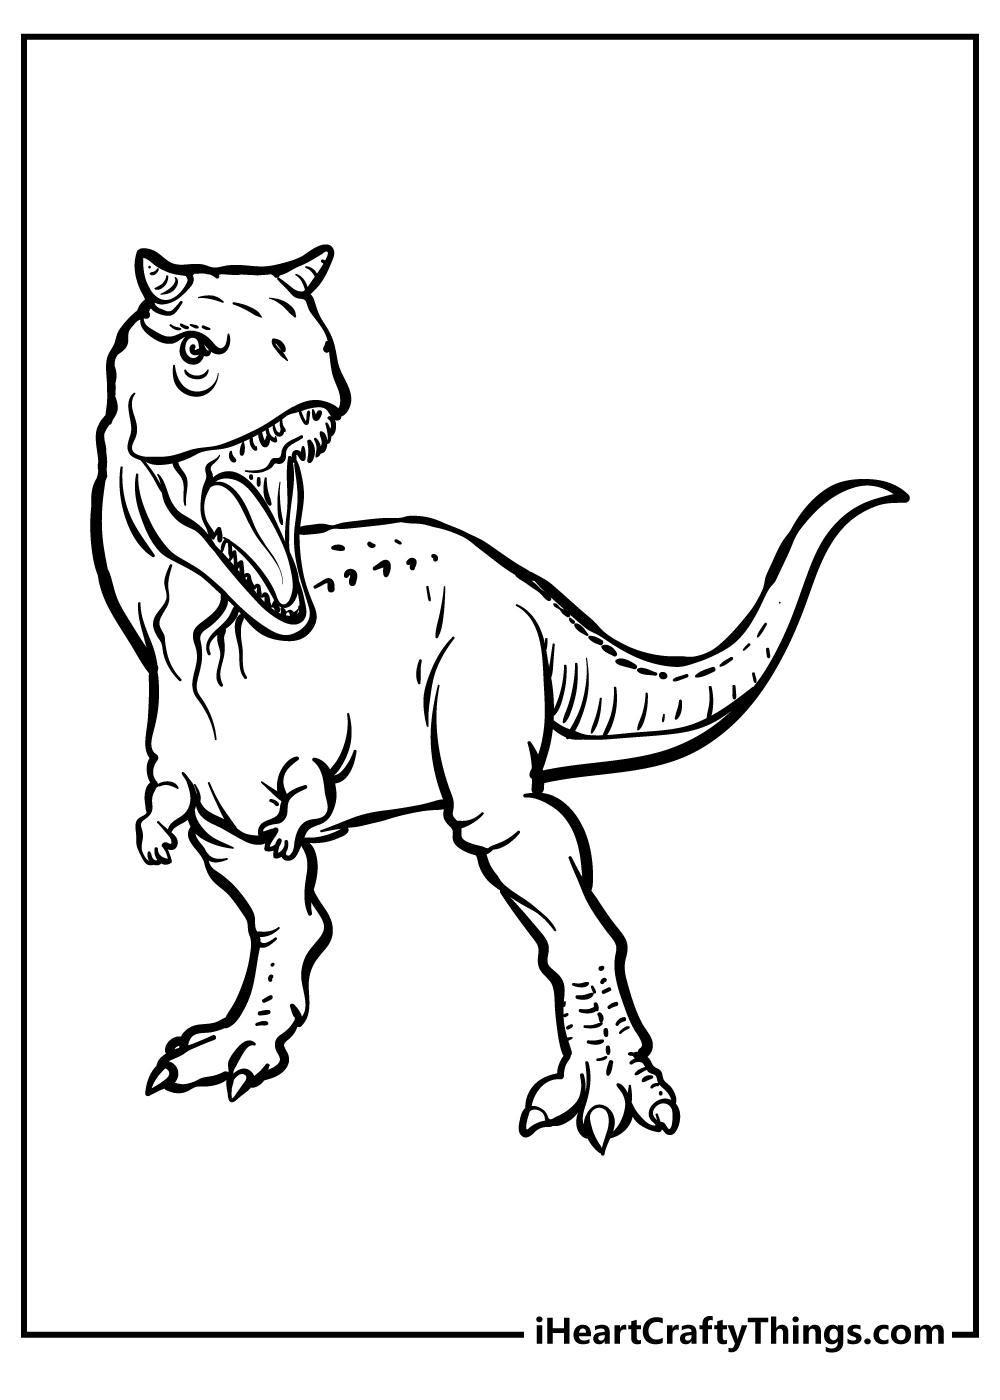 Jurassic World Coloring Pages free pdf download